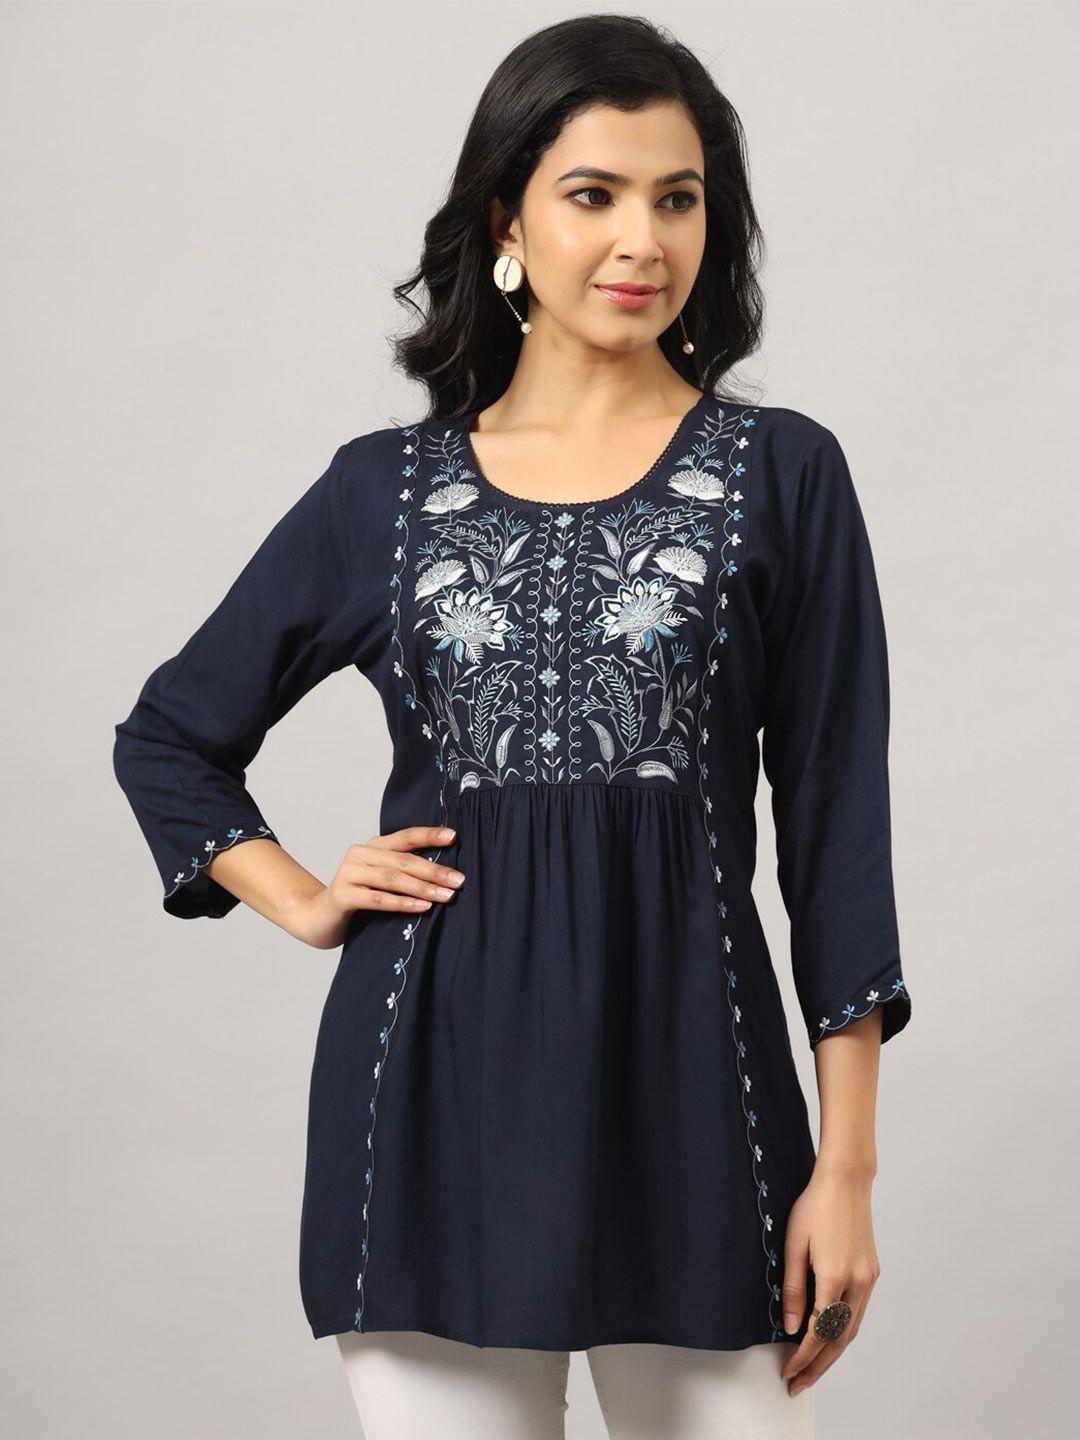 amchoor floral embroidered round neck empire top